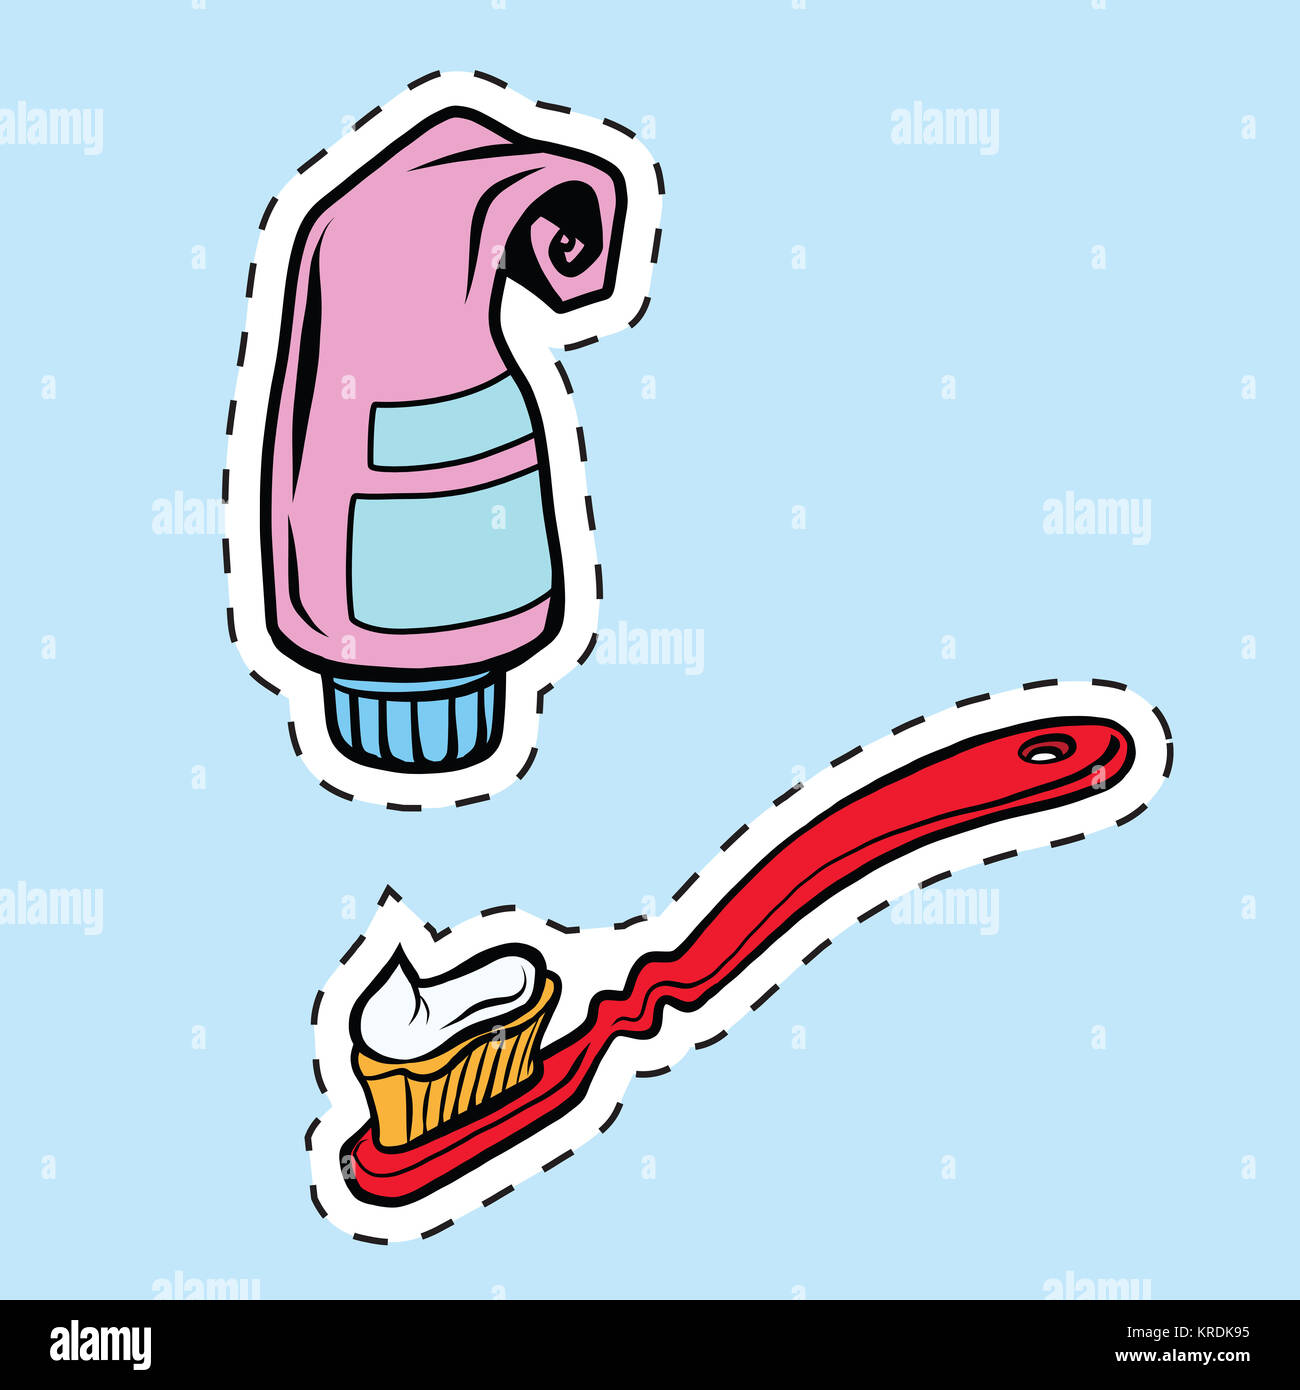 Toothbrush and toothpaste label sticker Stock Photo